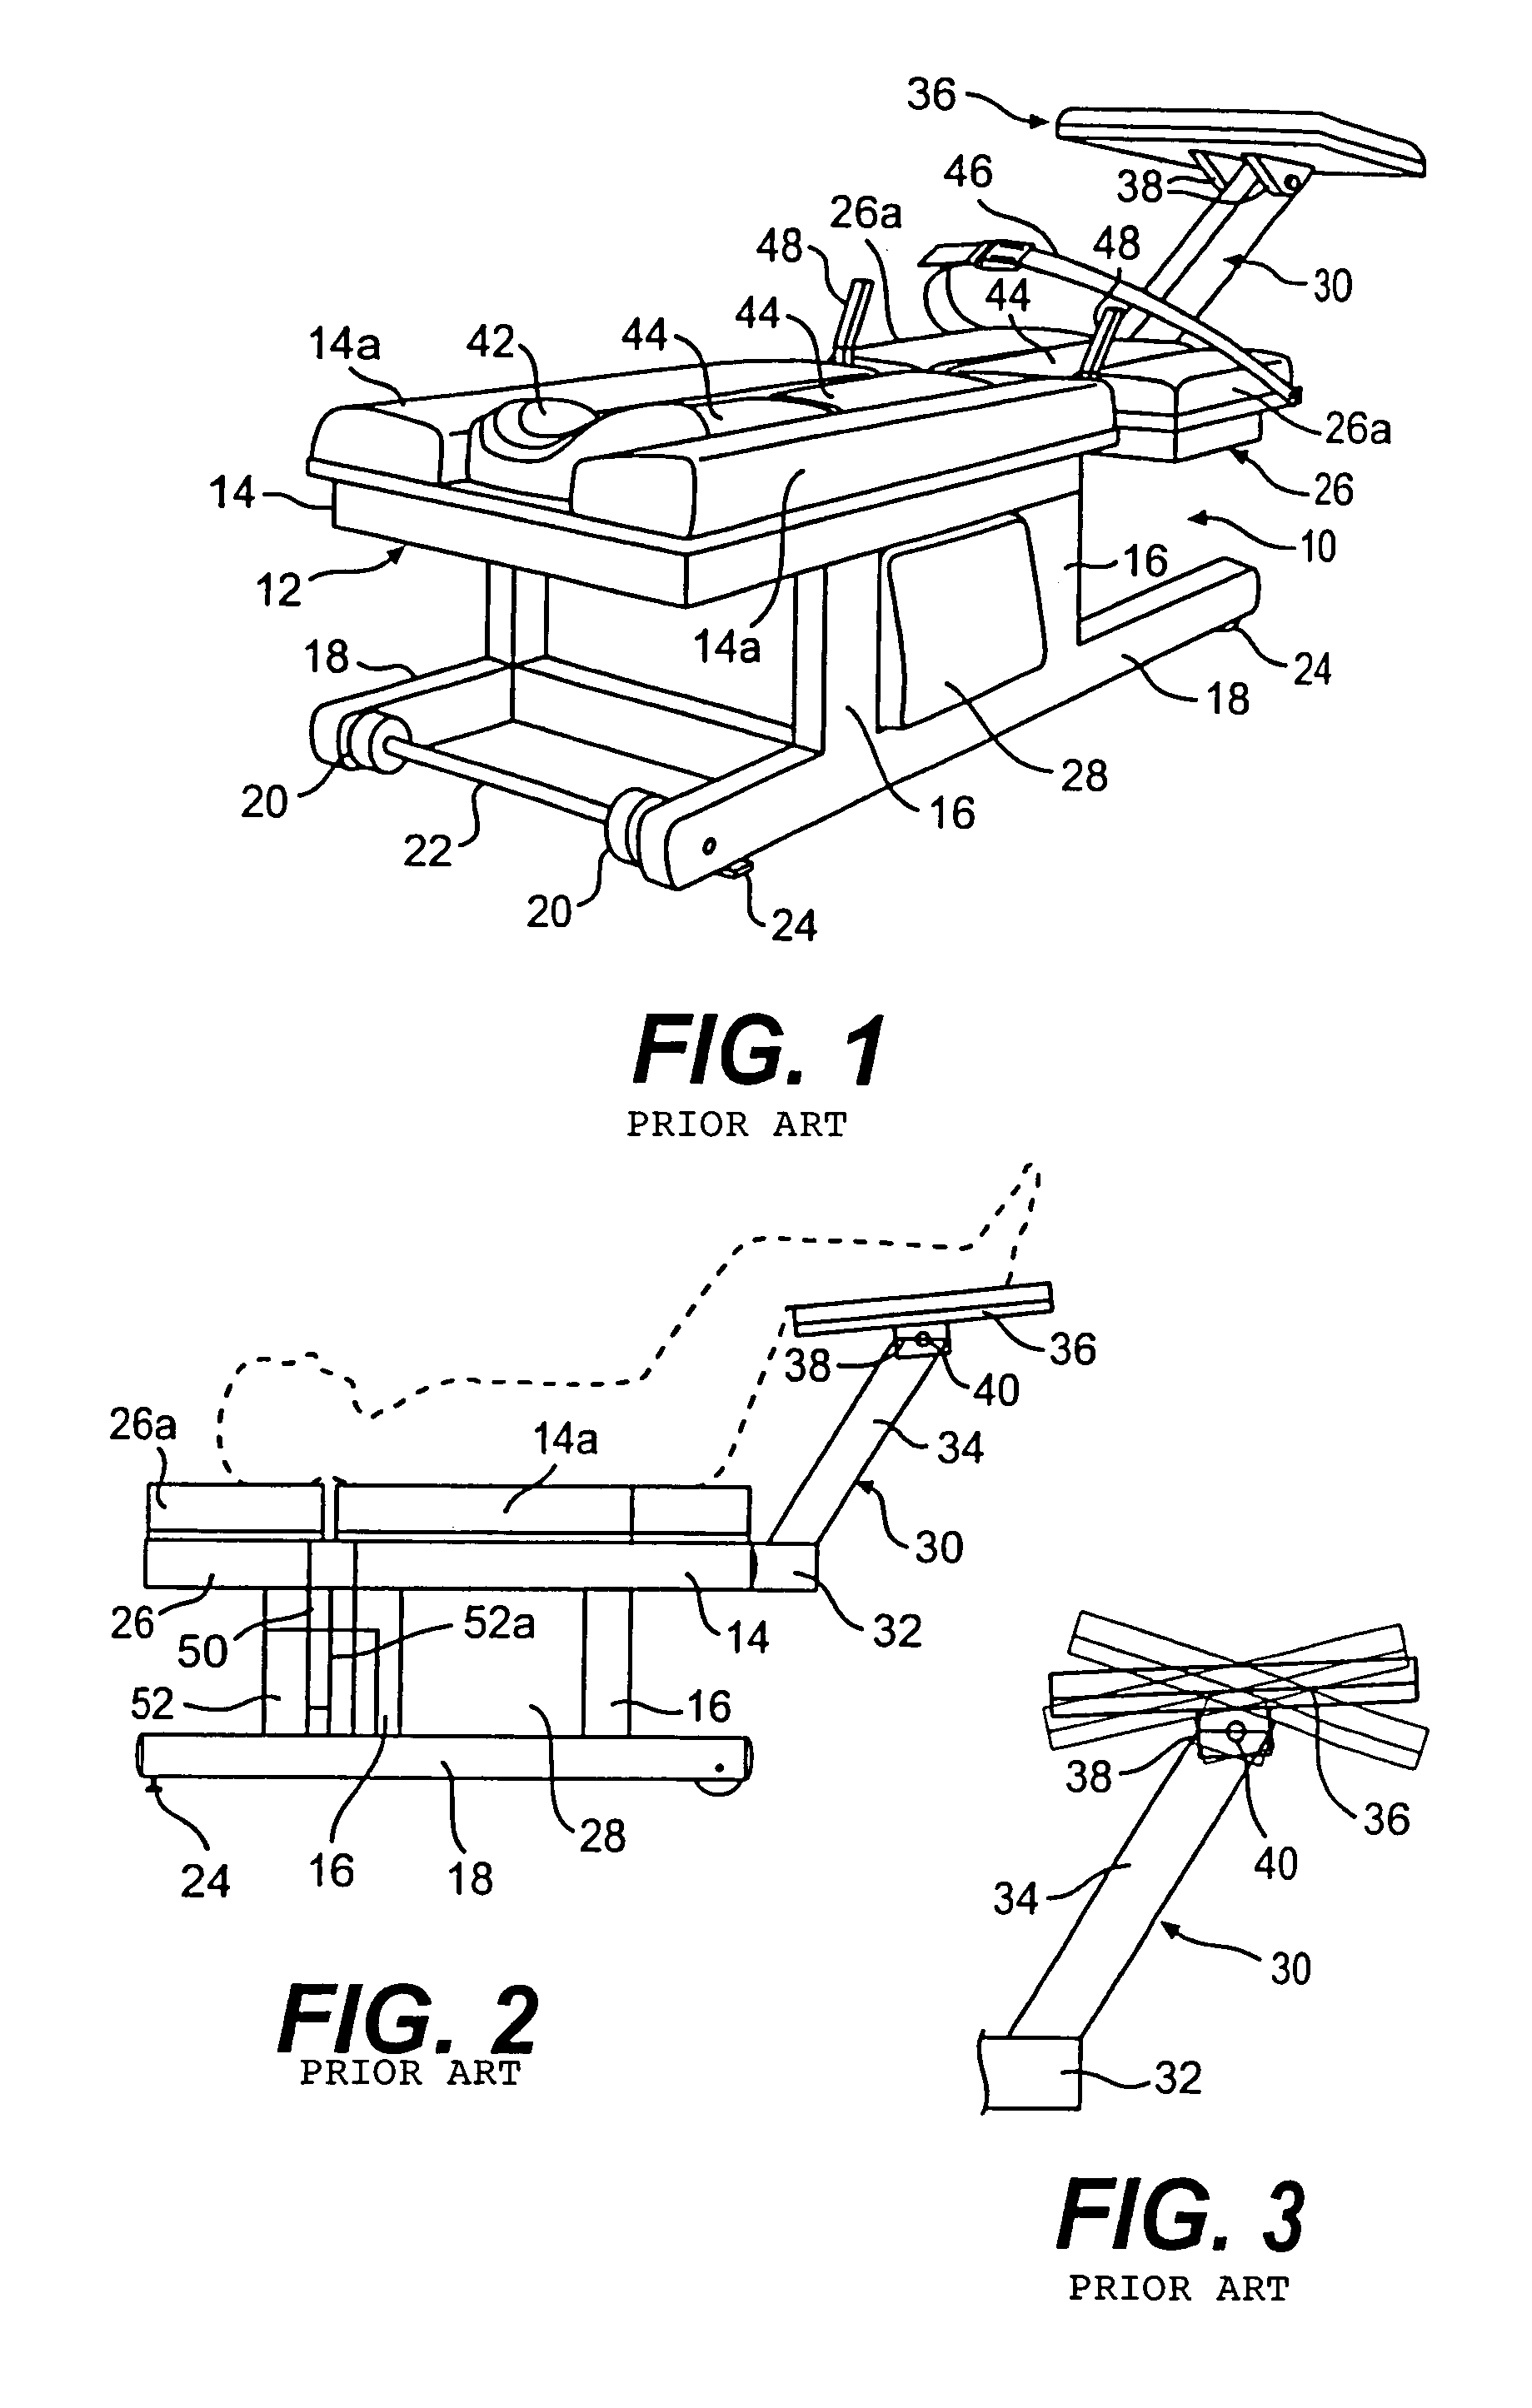 Passive motion machine providing controlled body motions for exercise and therapeutic purposes